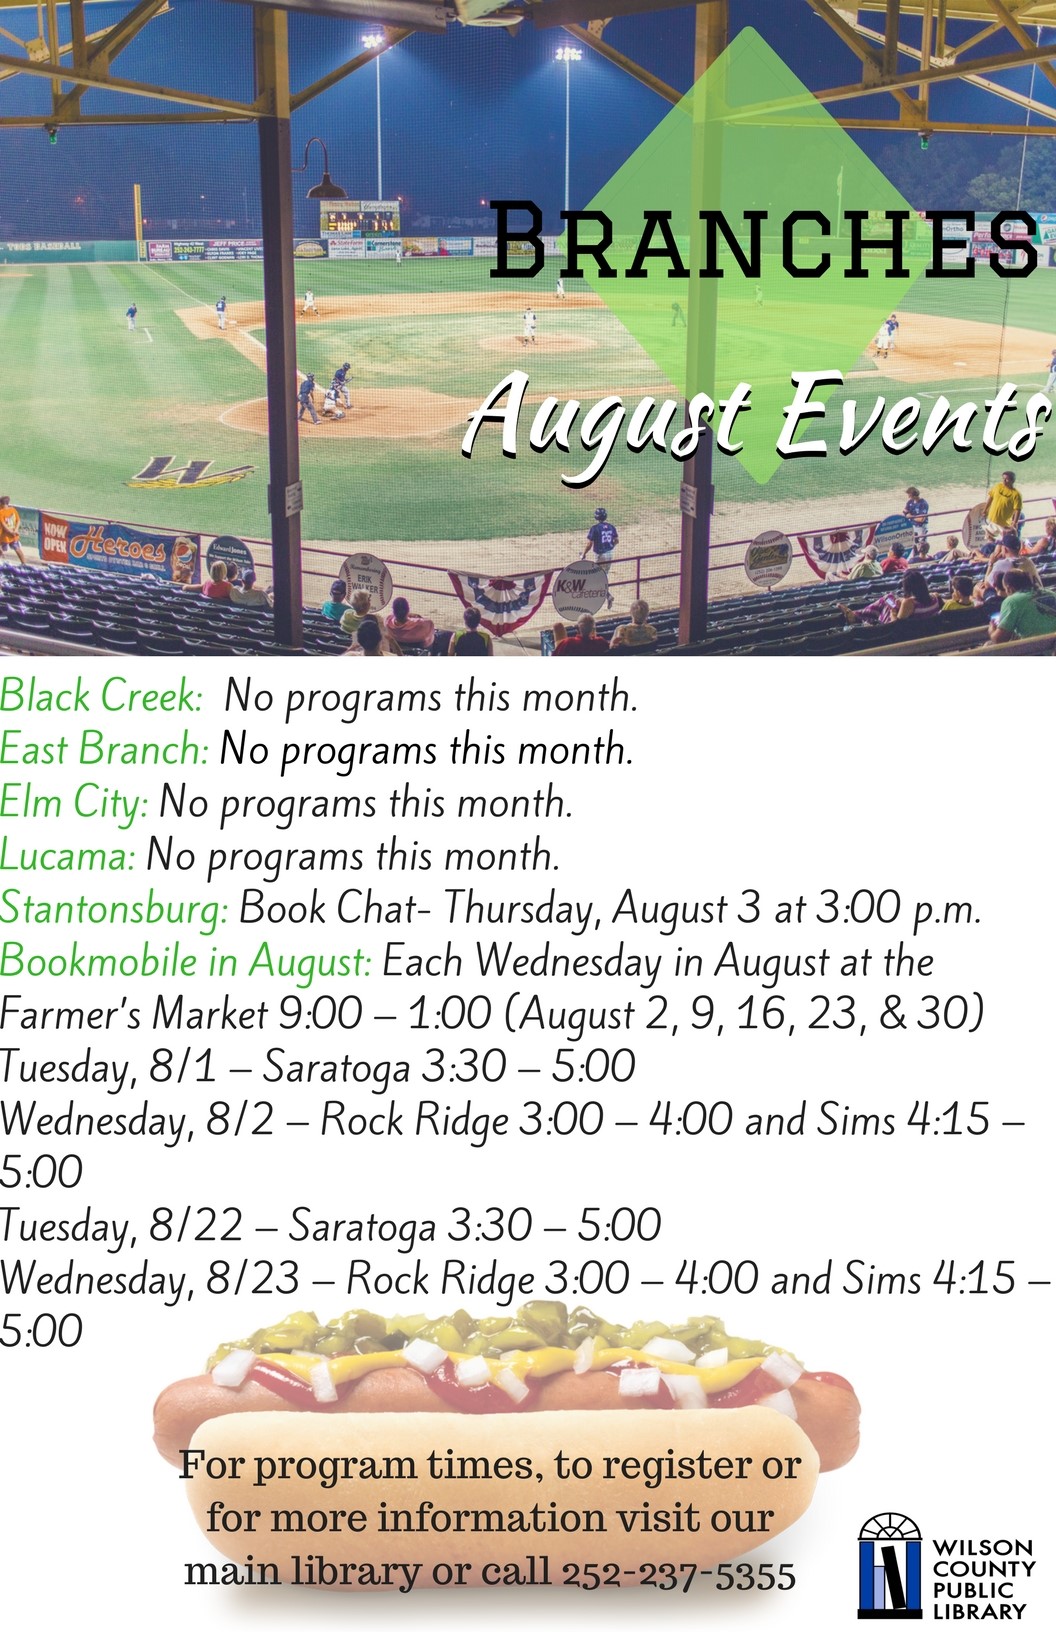 Branches August Events.jpg